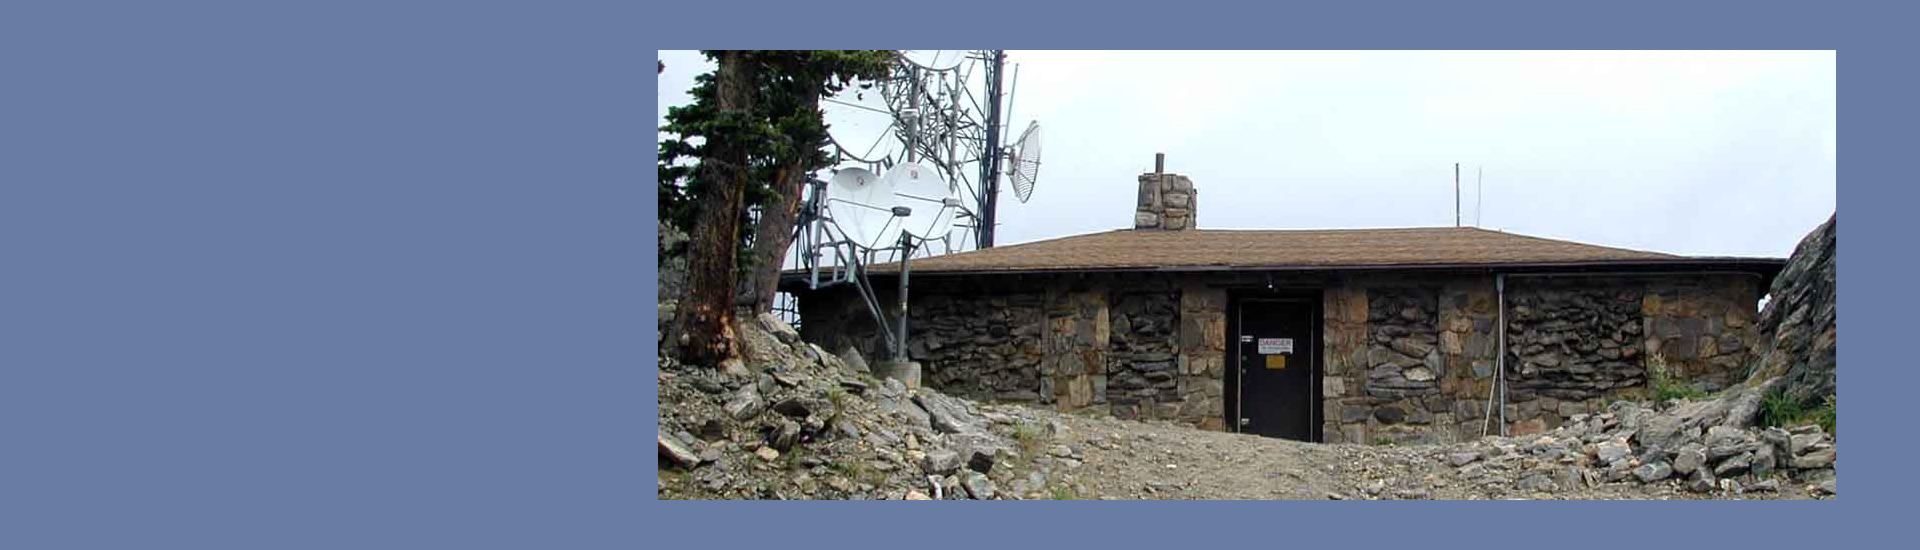 house of radios at squaw mountain hosted the first ham repeater at squaw